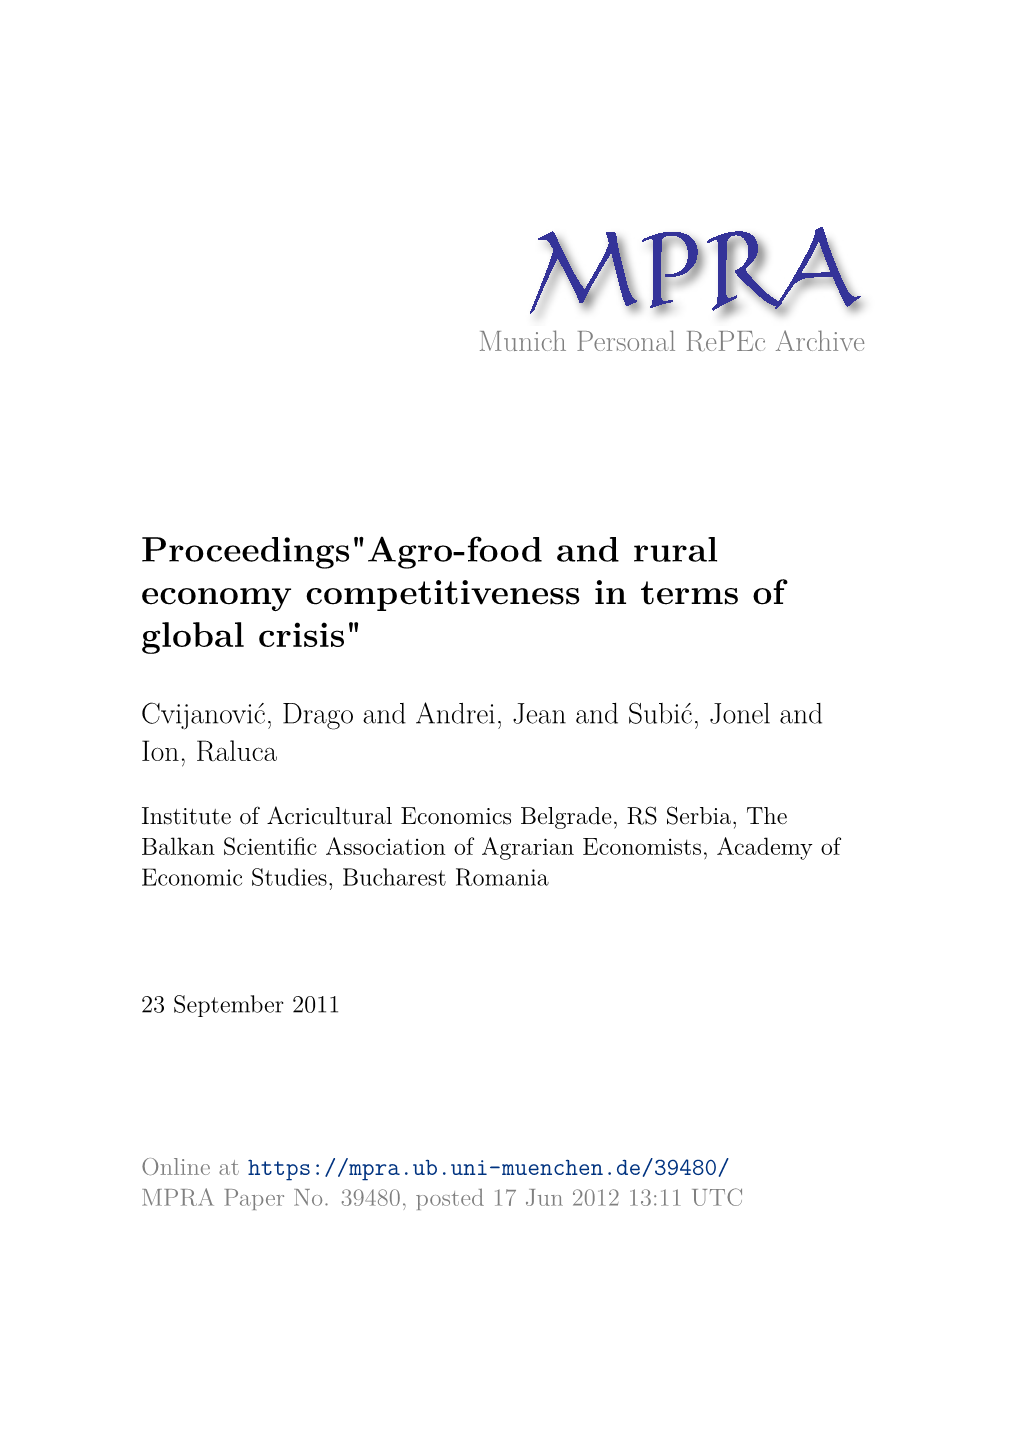 Proceedings"Agro-Food and Rural Economy Competitiveness in Terms of Global Crisis"